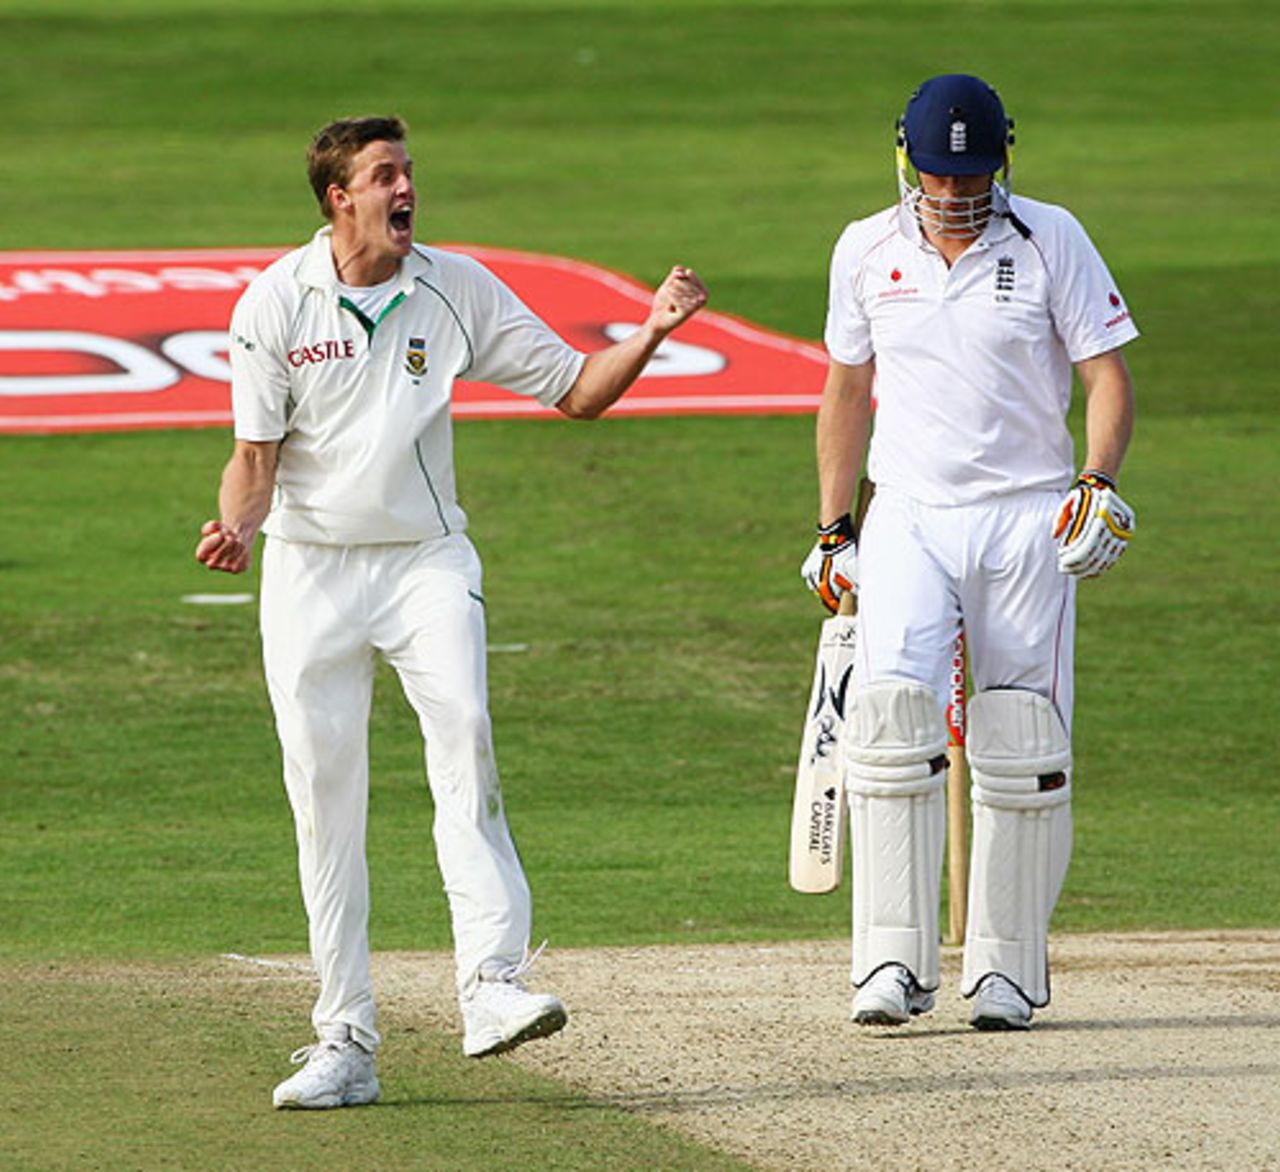 Morne Morkel removes Andrew Flintoff as England crumble, England v South Africa, 2nd Test, Headingley, July 21, 2008